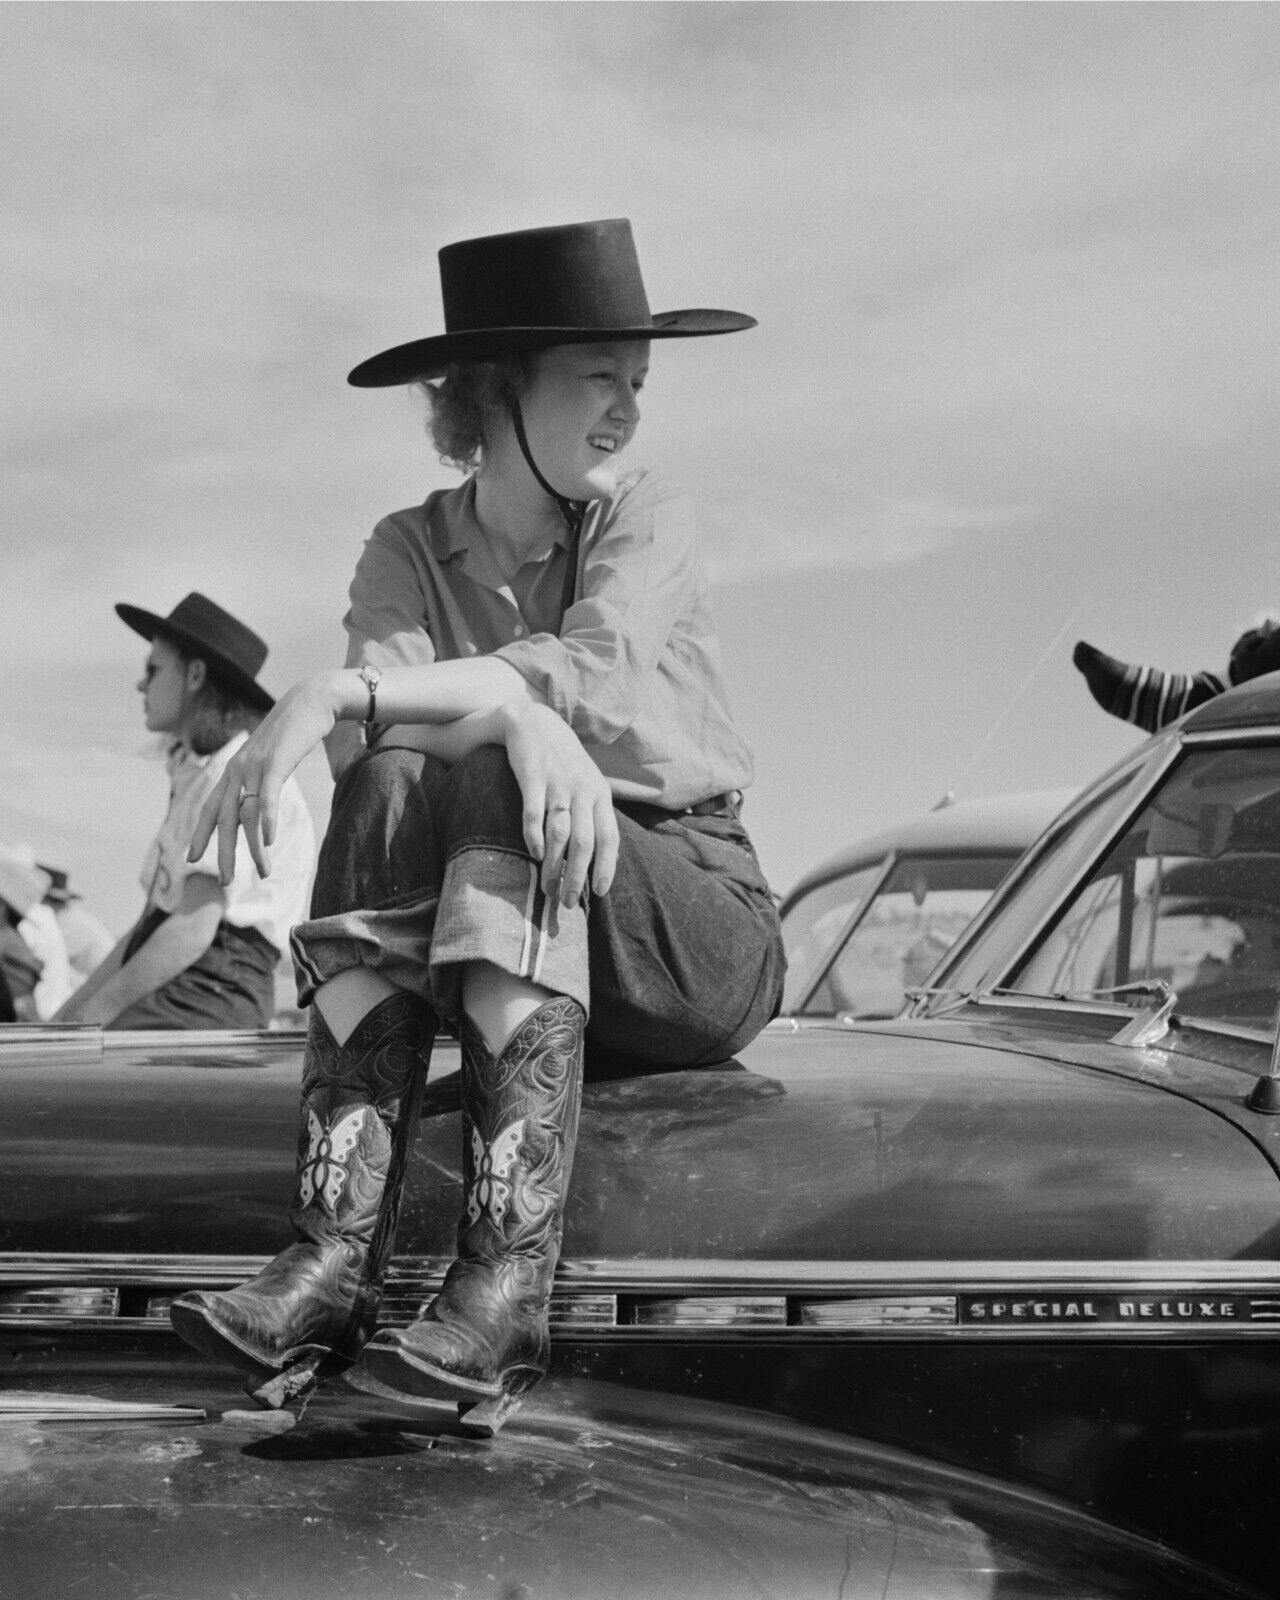 Cowgirl Vintage Photograph Sitting On Car Rodeo Western Life Montana 1930s 8x10